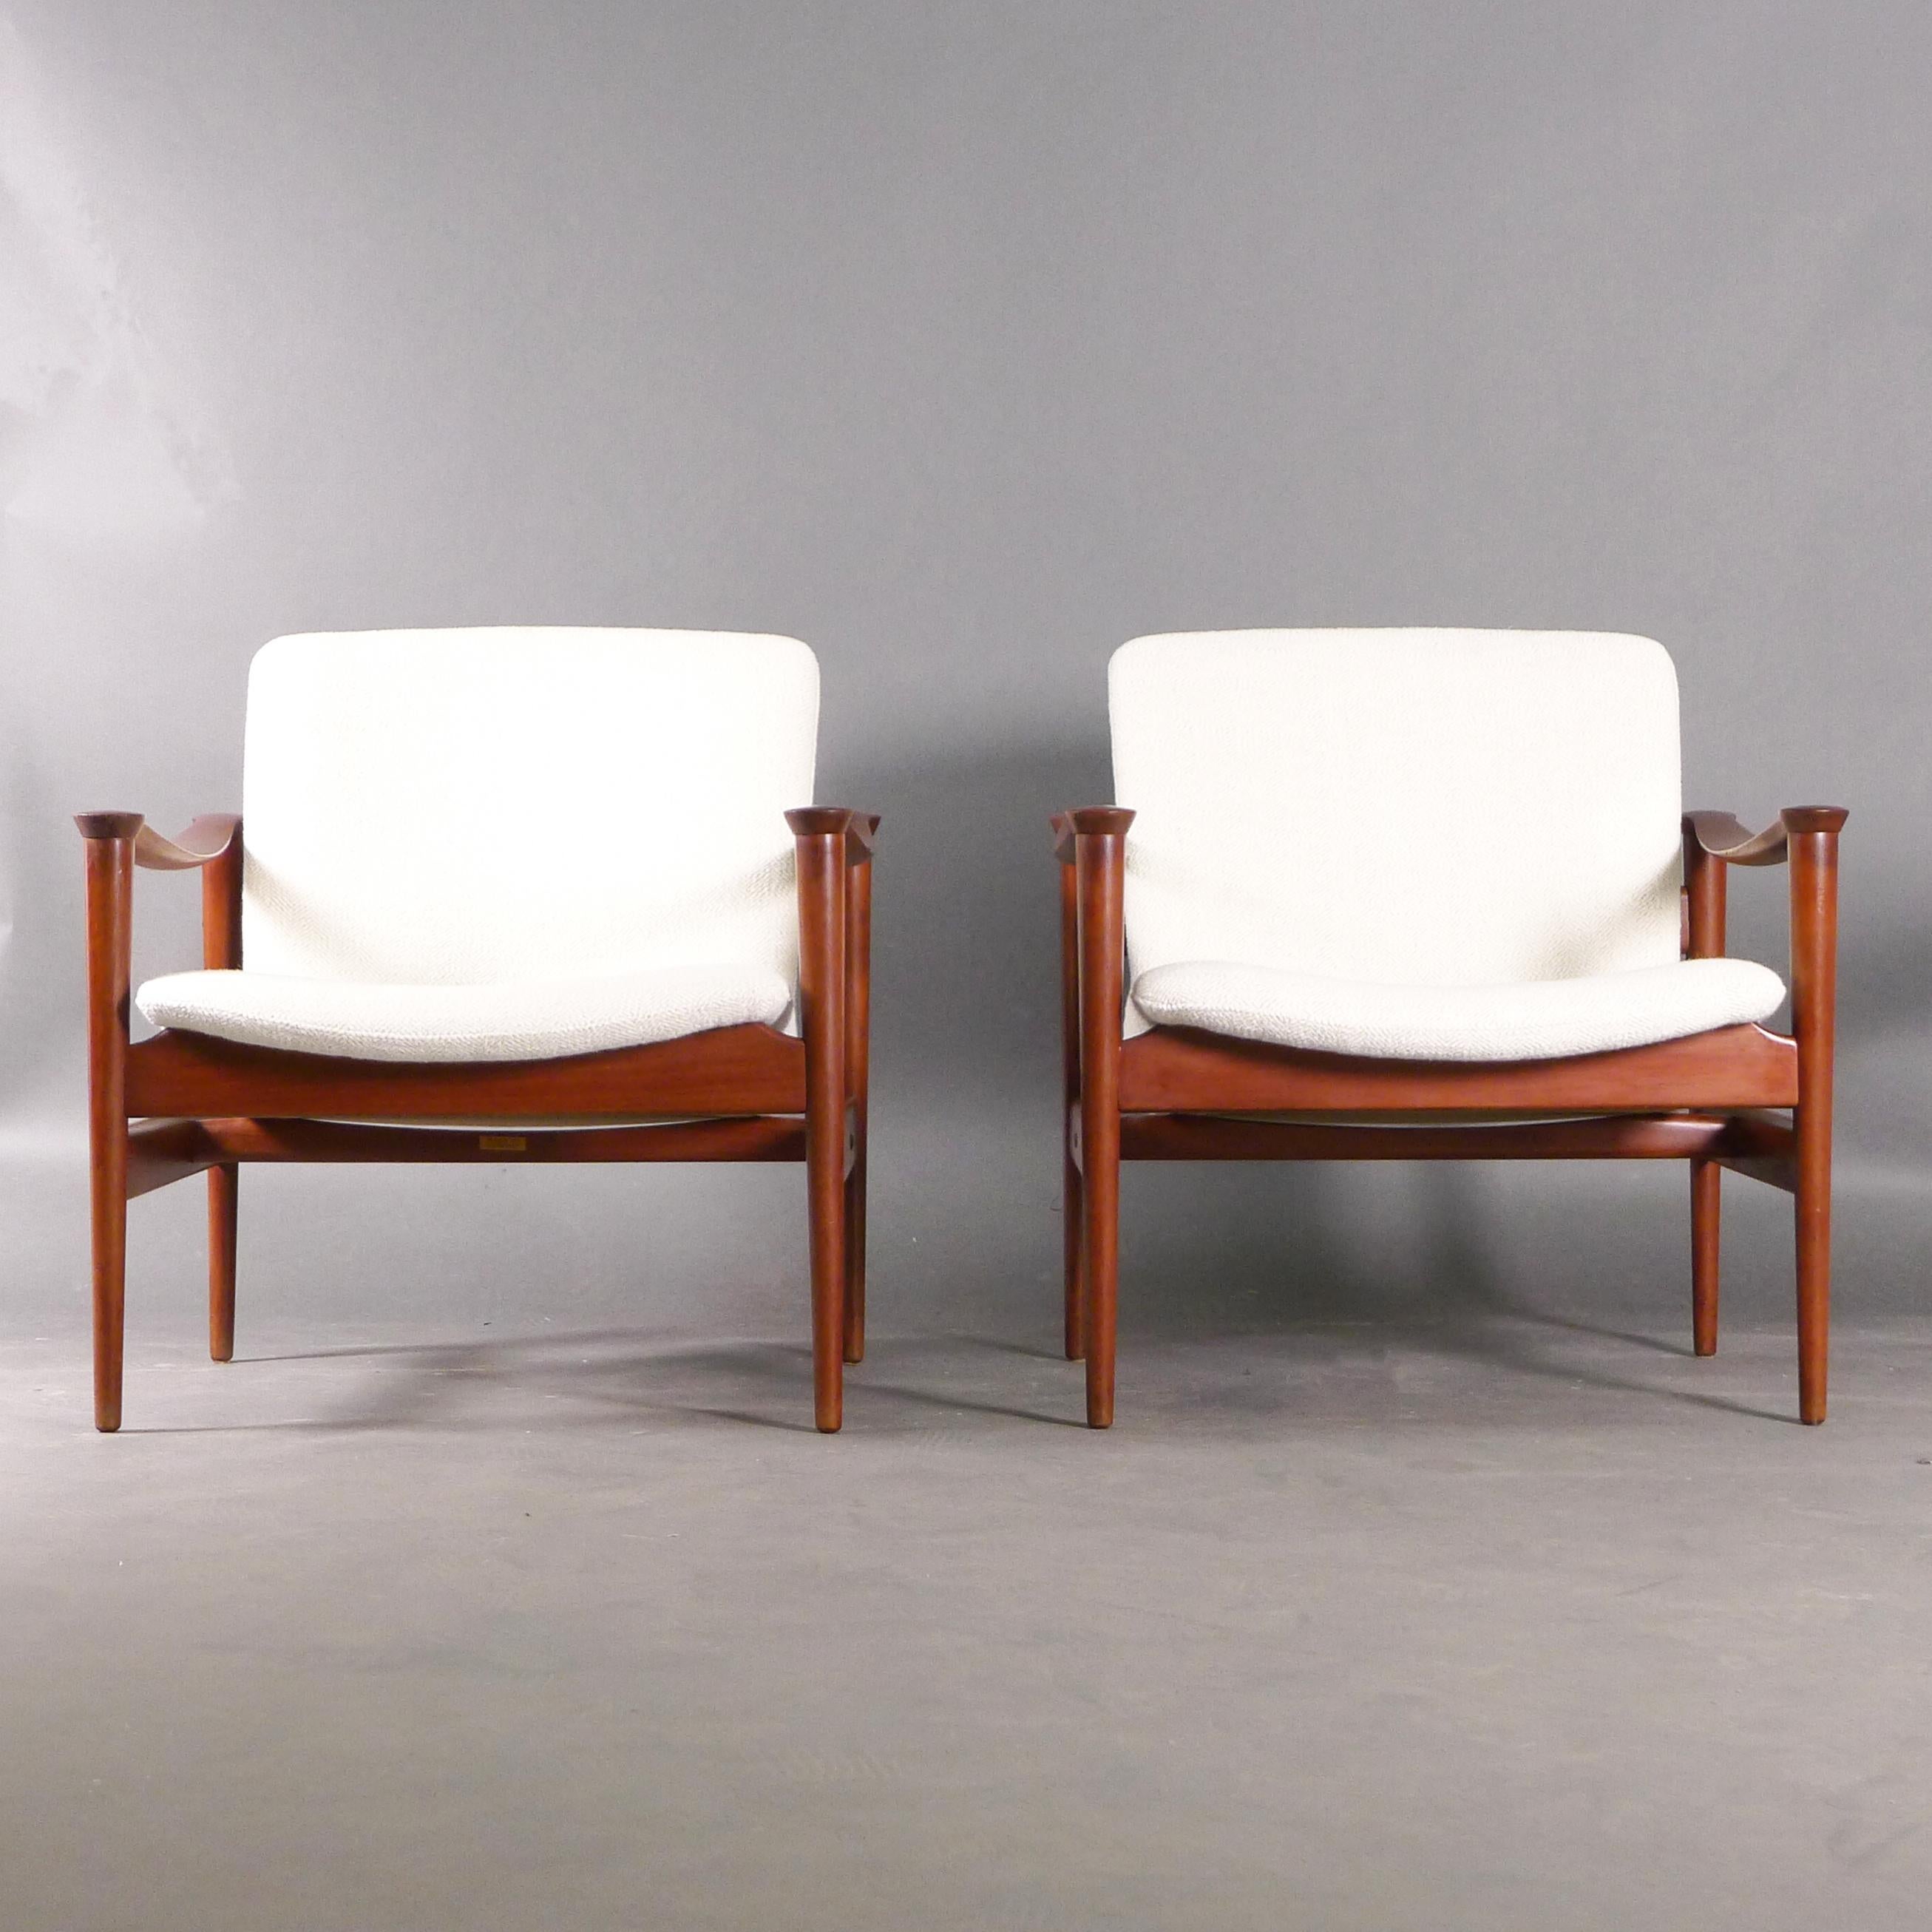 Beautiful pair of Norwegian 1960s lounge chairs, model 711, designed by Fredrik A Kayser in 1960 and made by Vatne Lenestolfabrikk. The teak frames have a lovely patina and feature roundels to the shaped armrests. The chairs have been newly